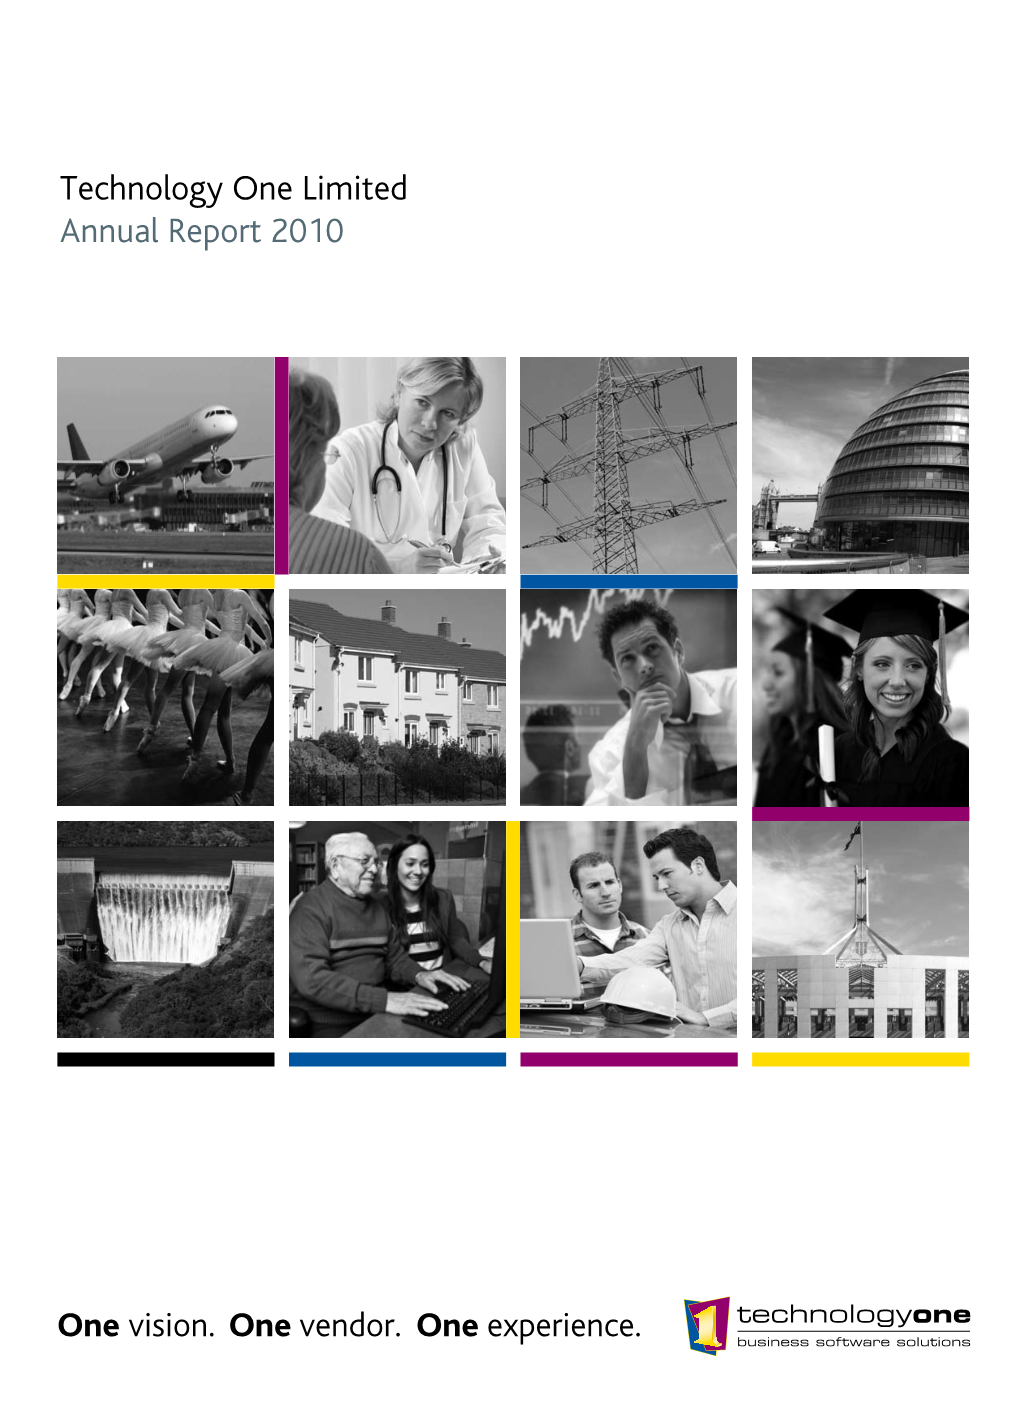 Technology One Limited Annual Report 2010